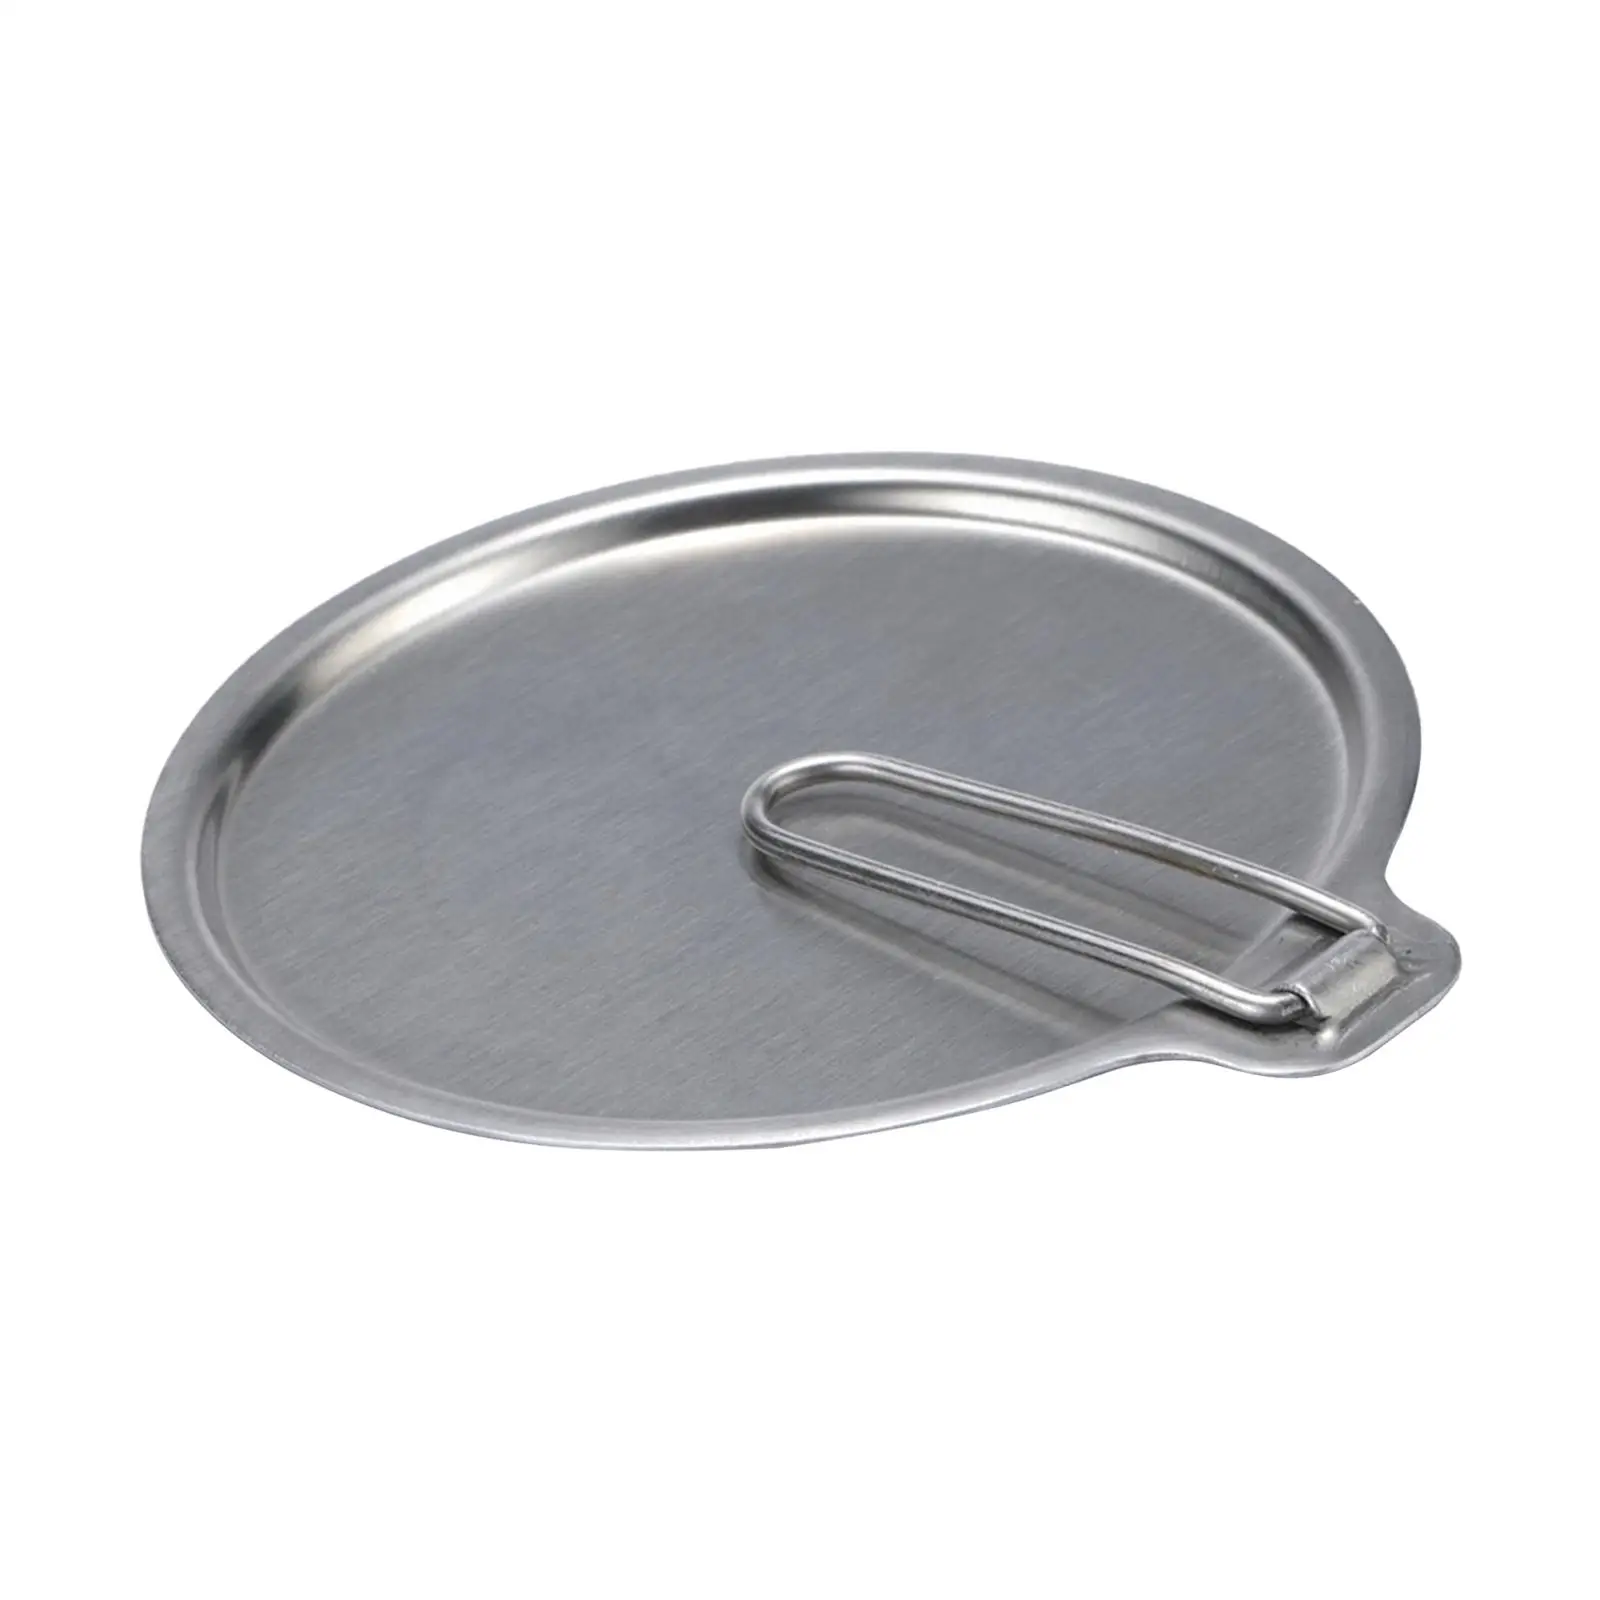 Stainless Steel Camping Pot Lid Bowl Dish Cover Hiking Dinnerware Tableware